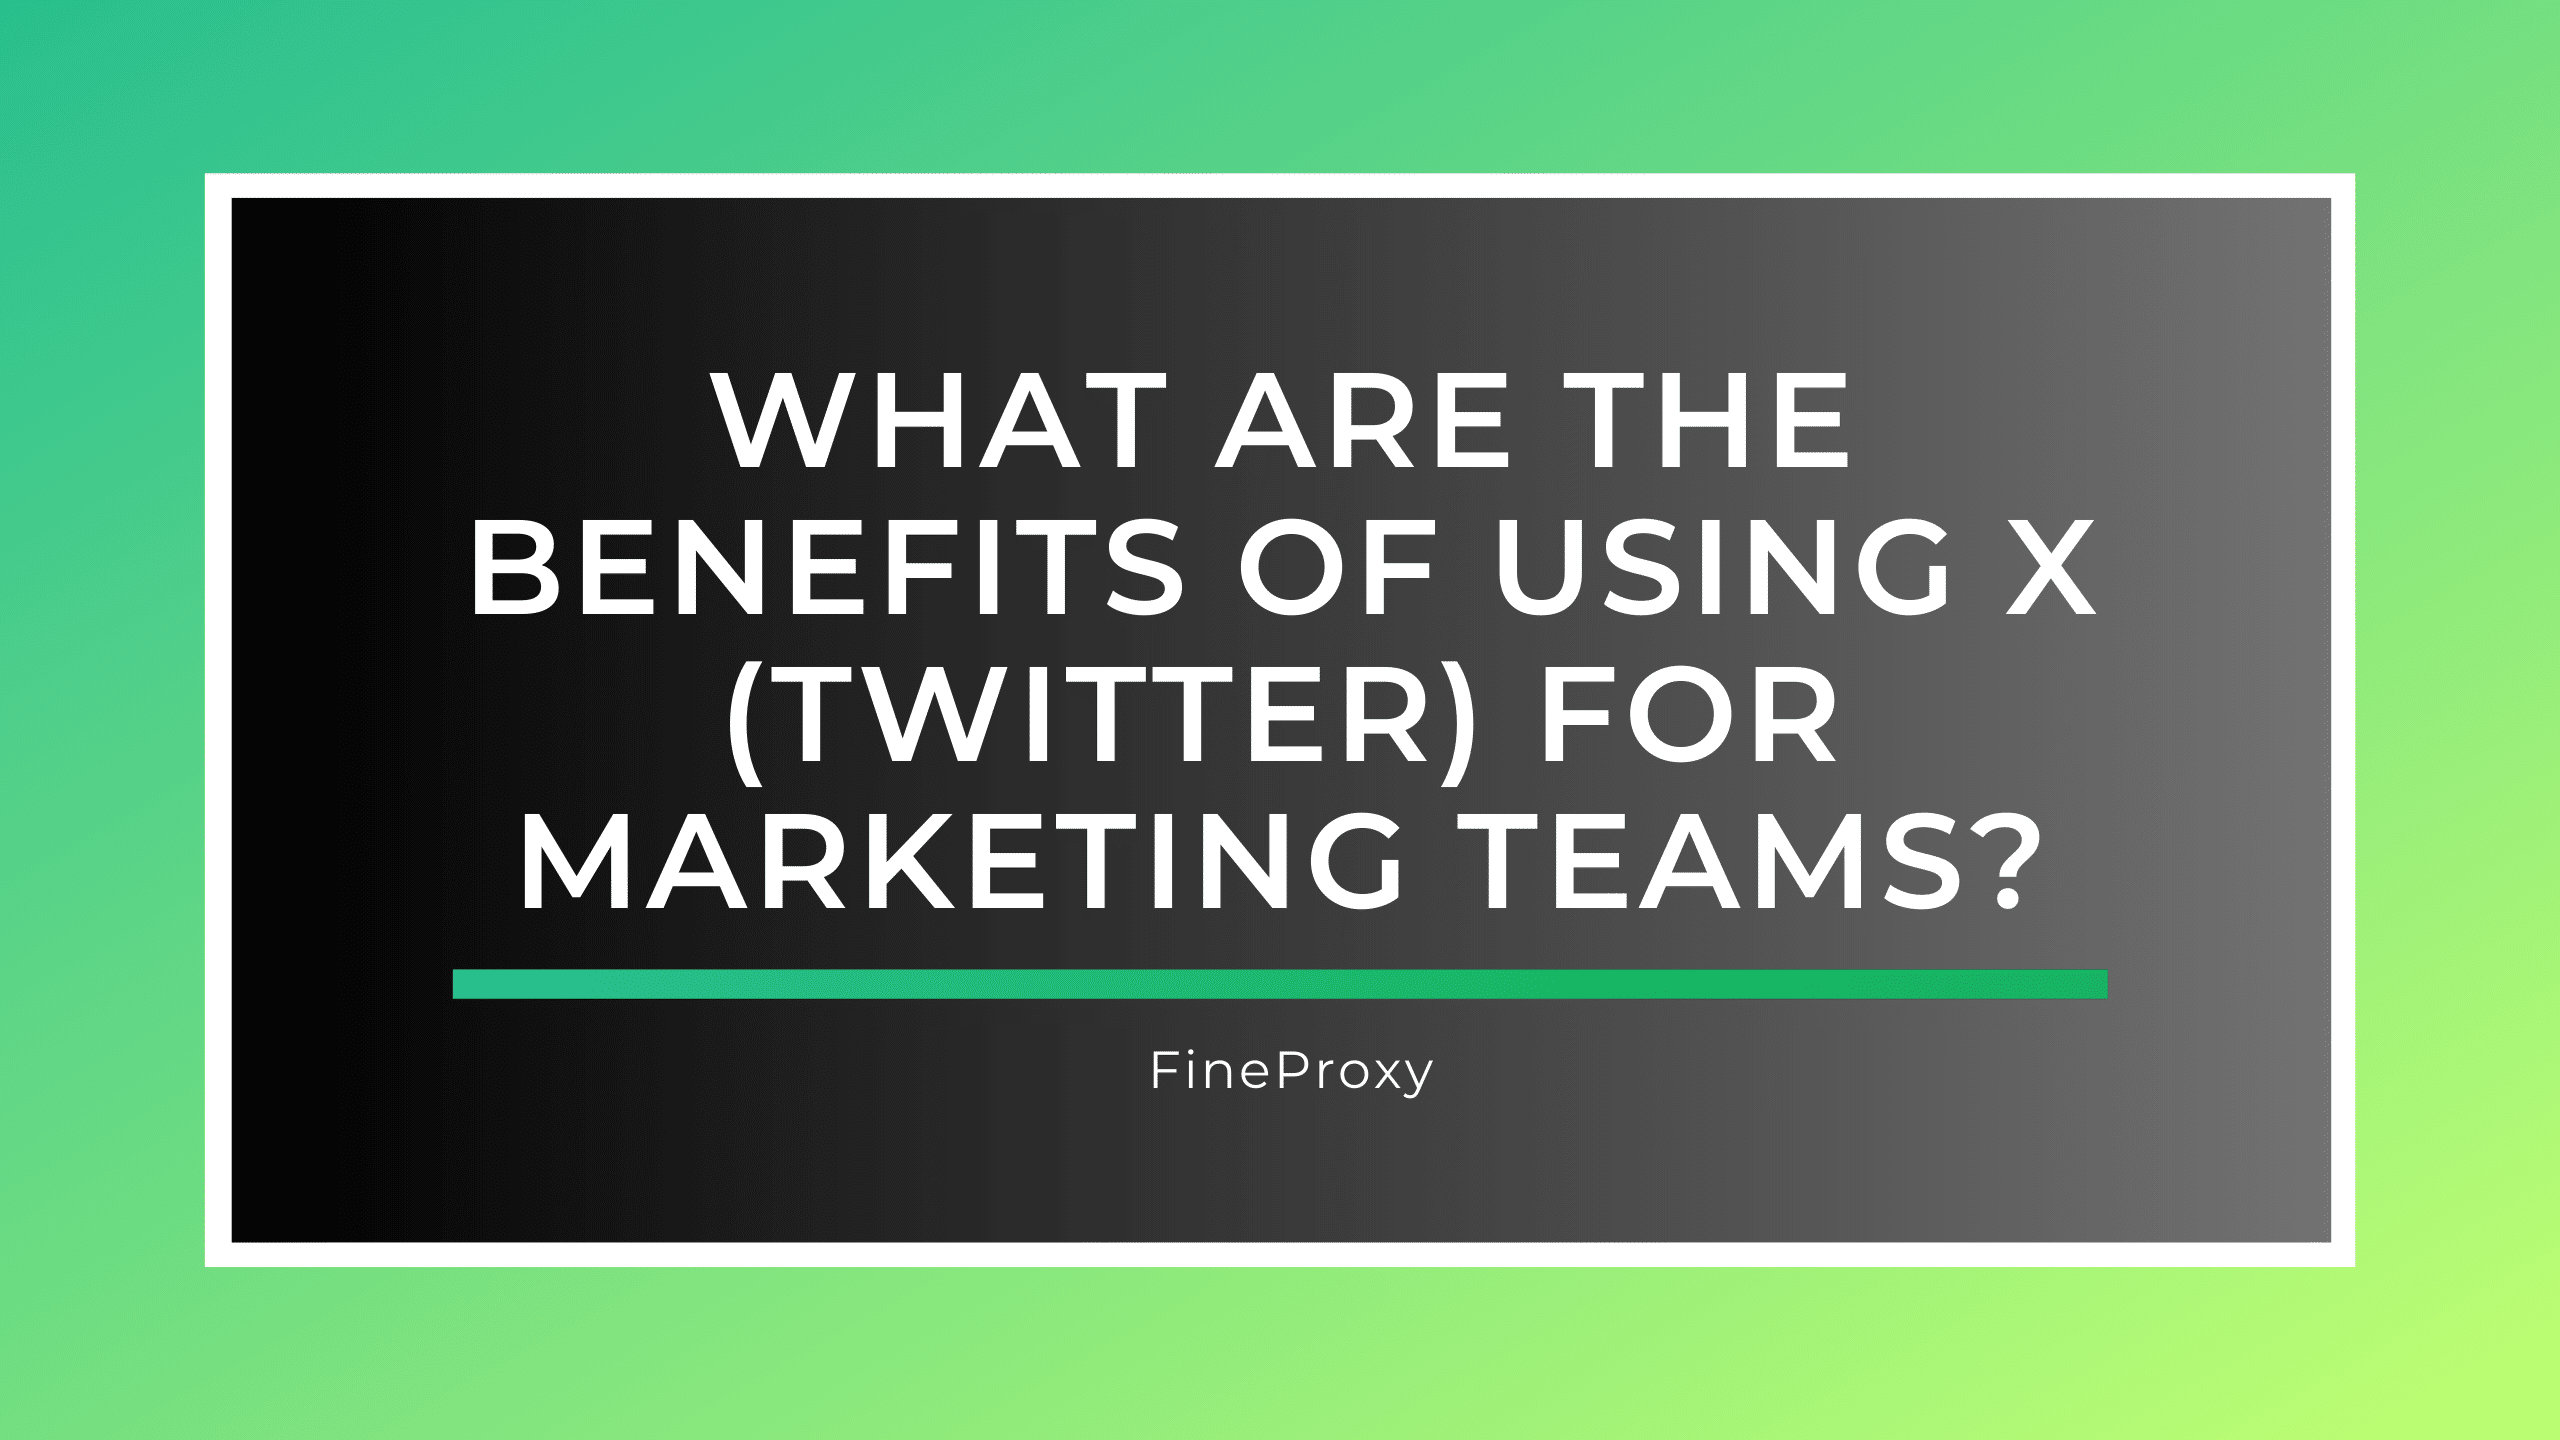 What are the benefits of using X (Twitter) for marketing teams?